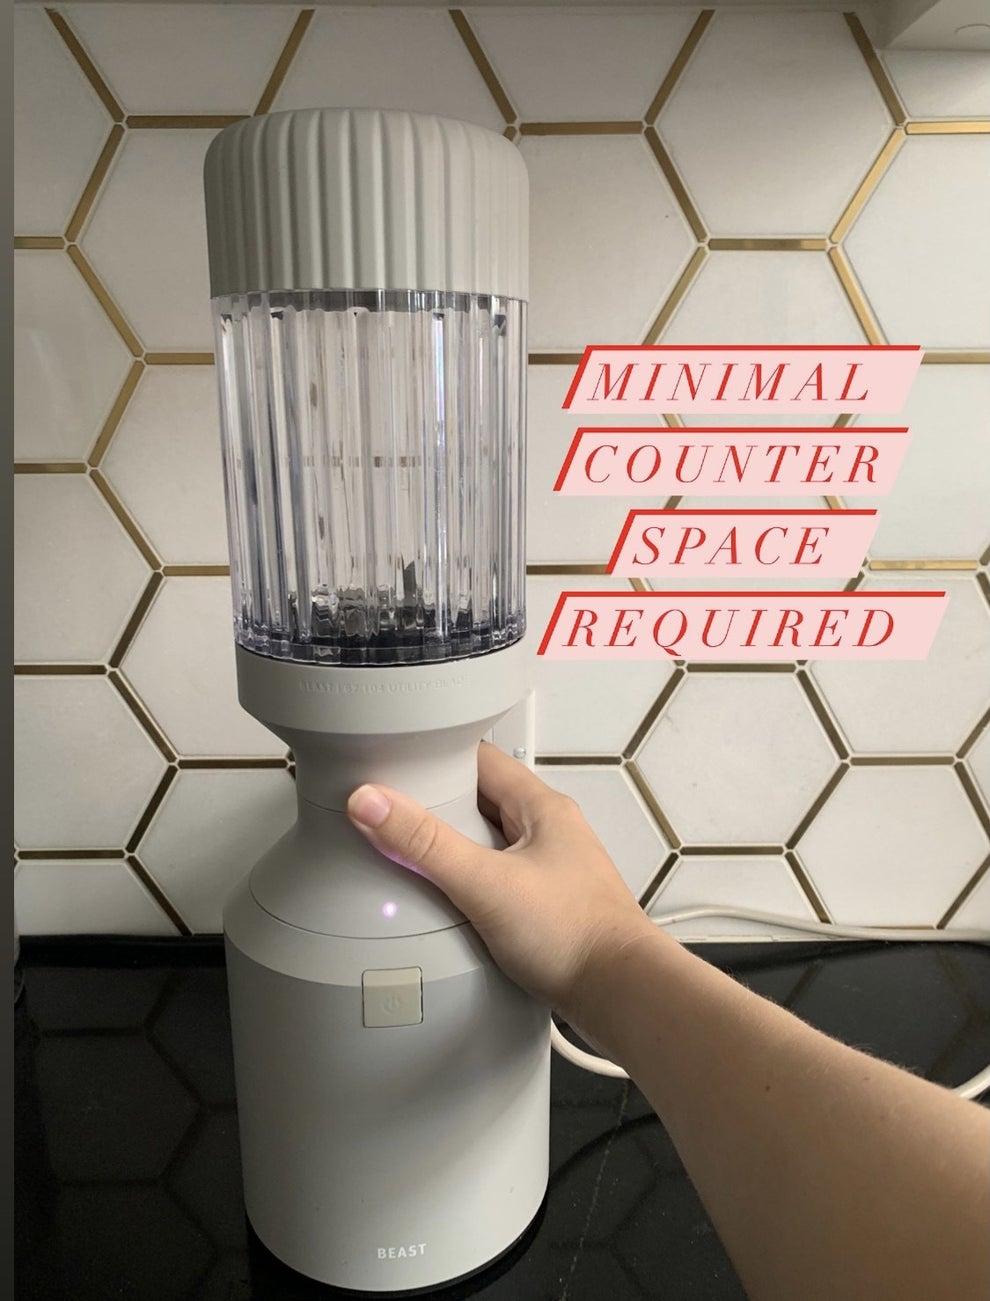 I Tried the Famous Beast Blender and Here's Why You Should Too